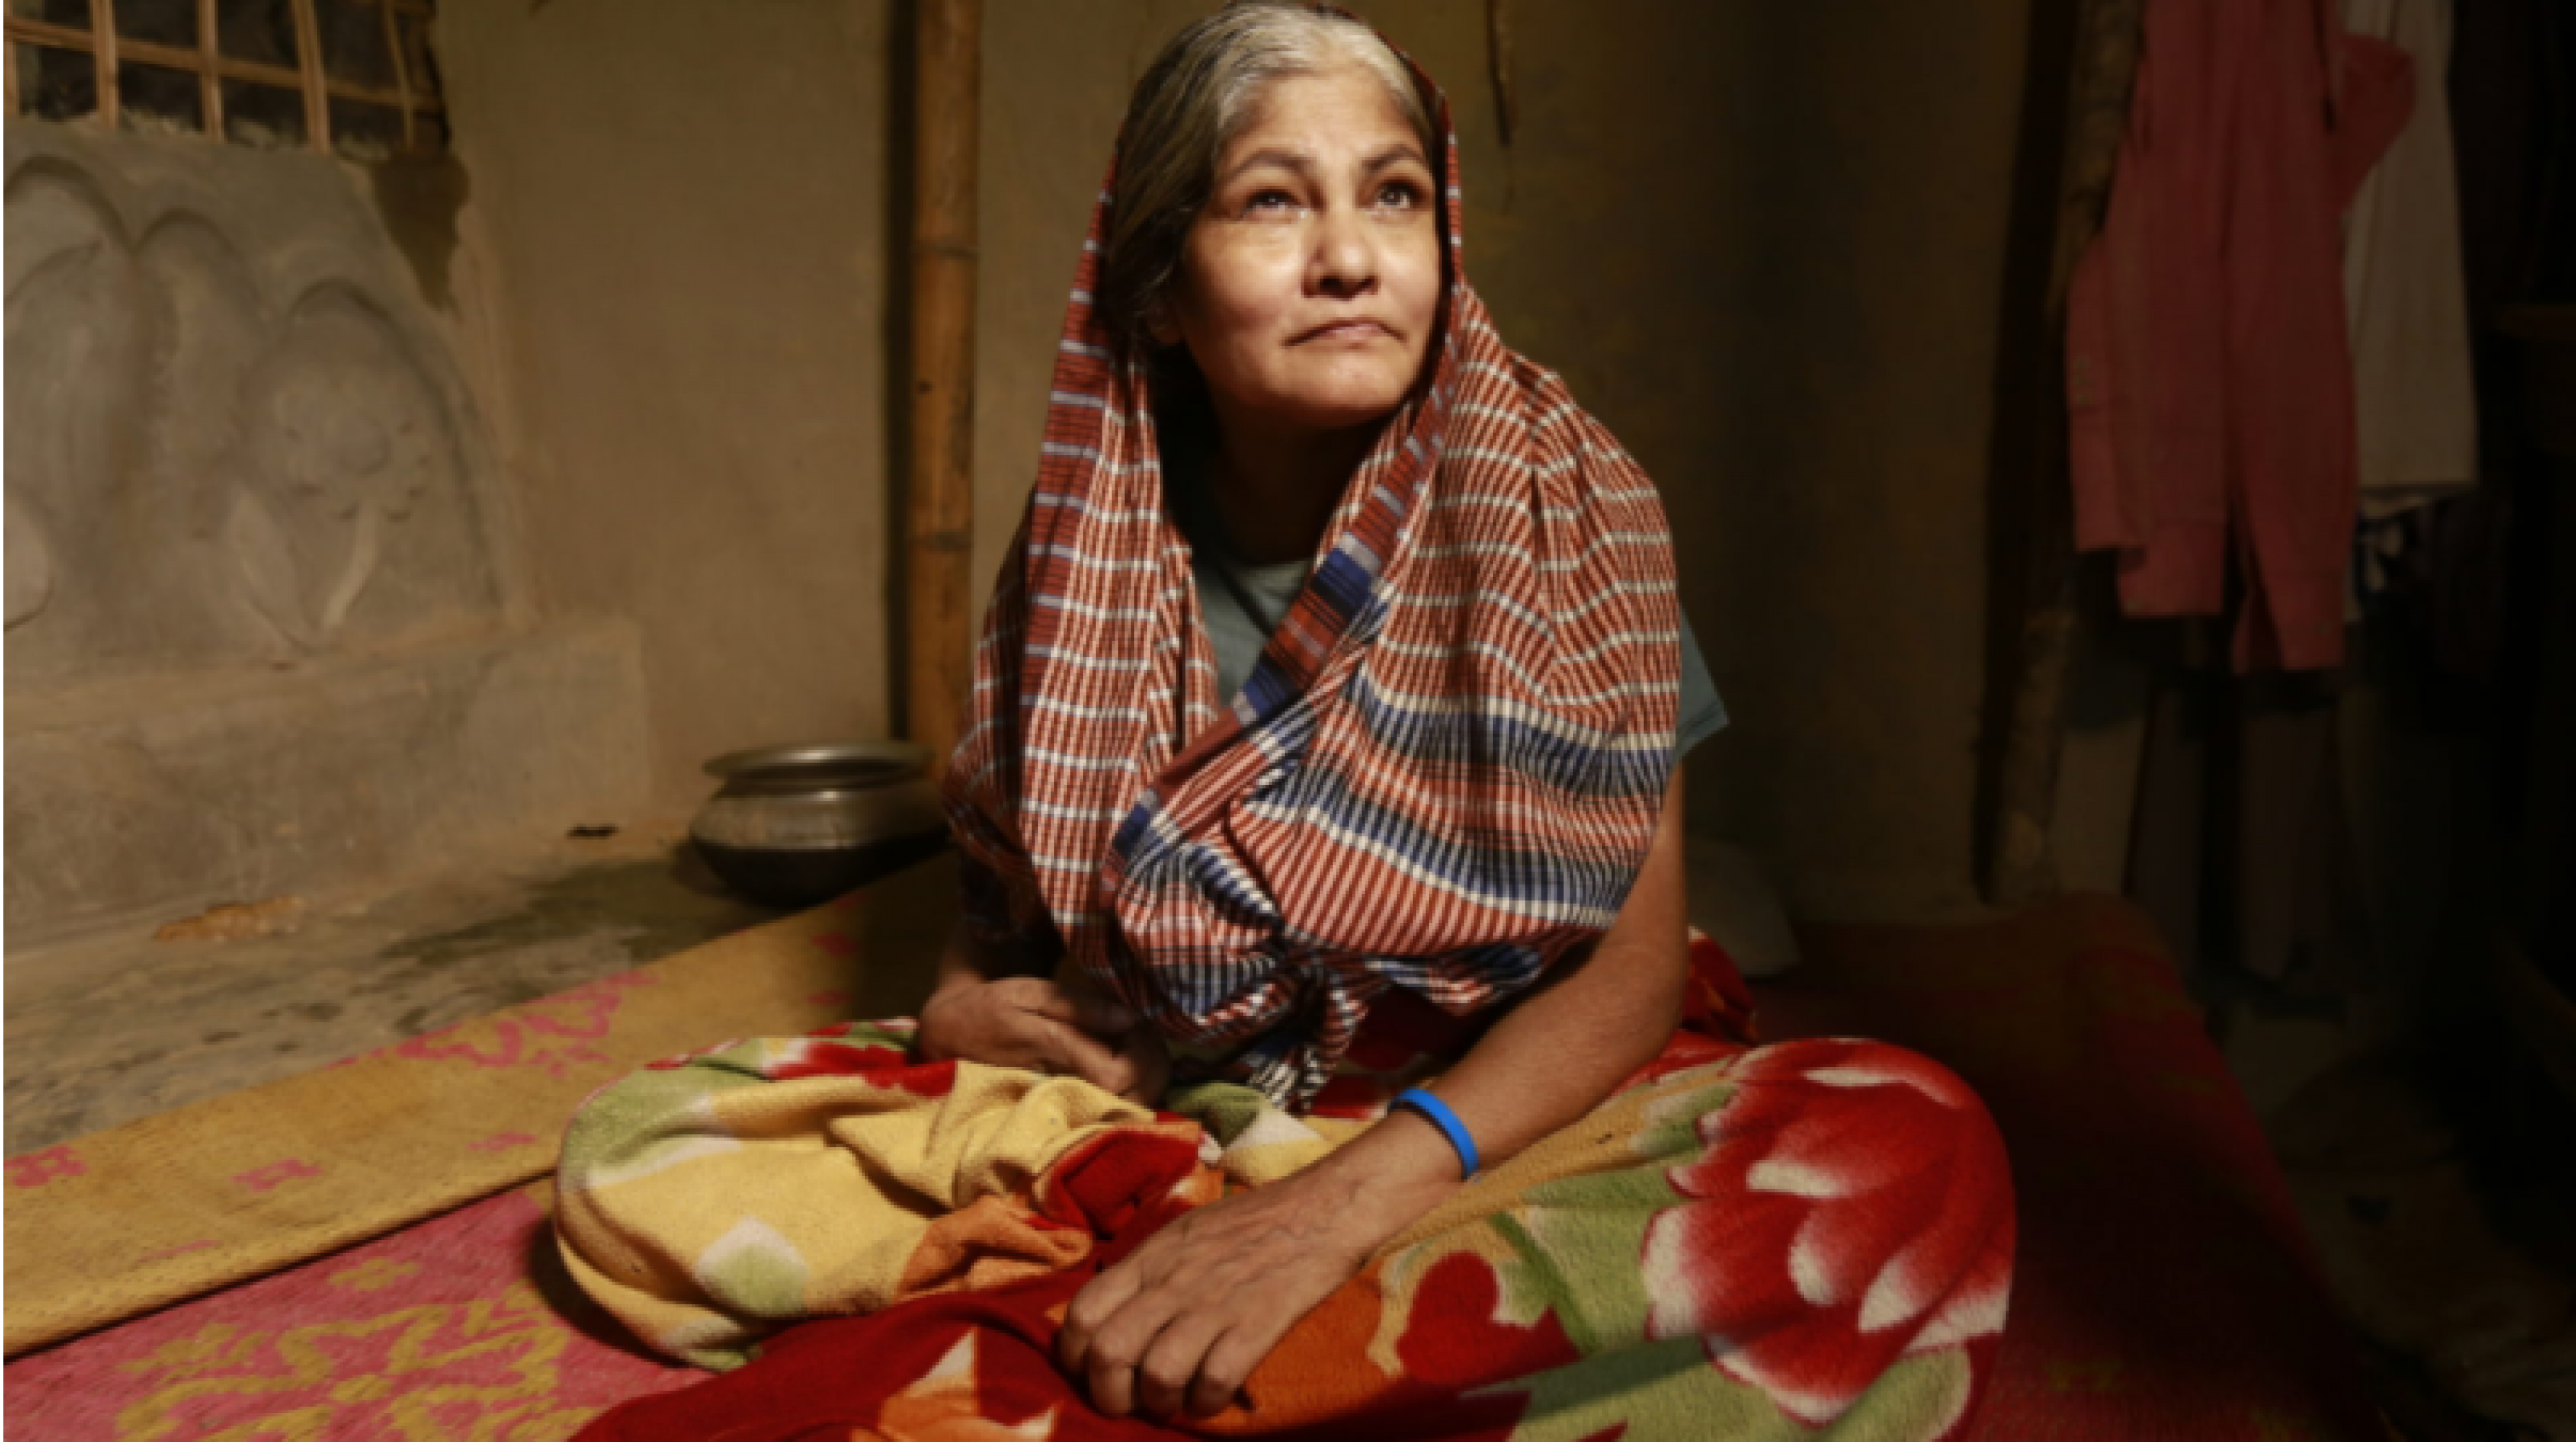 The photo shows an older woman with a physical disability sitting in her house.